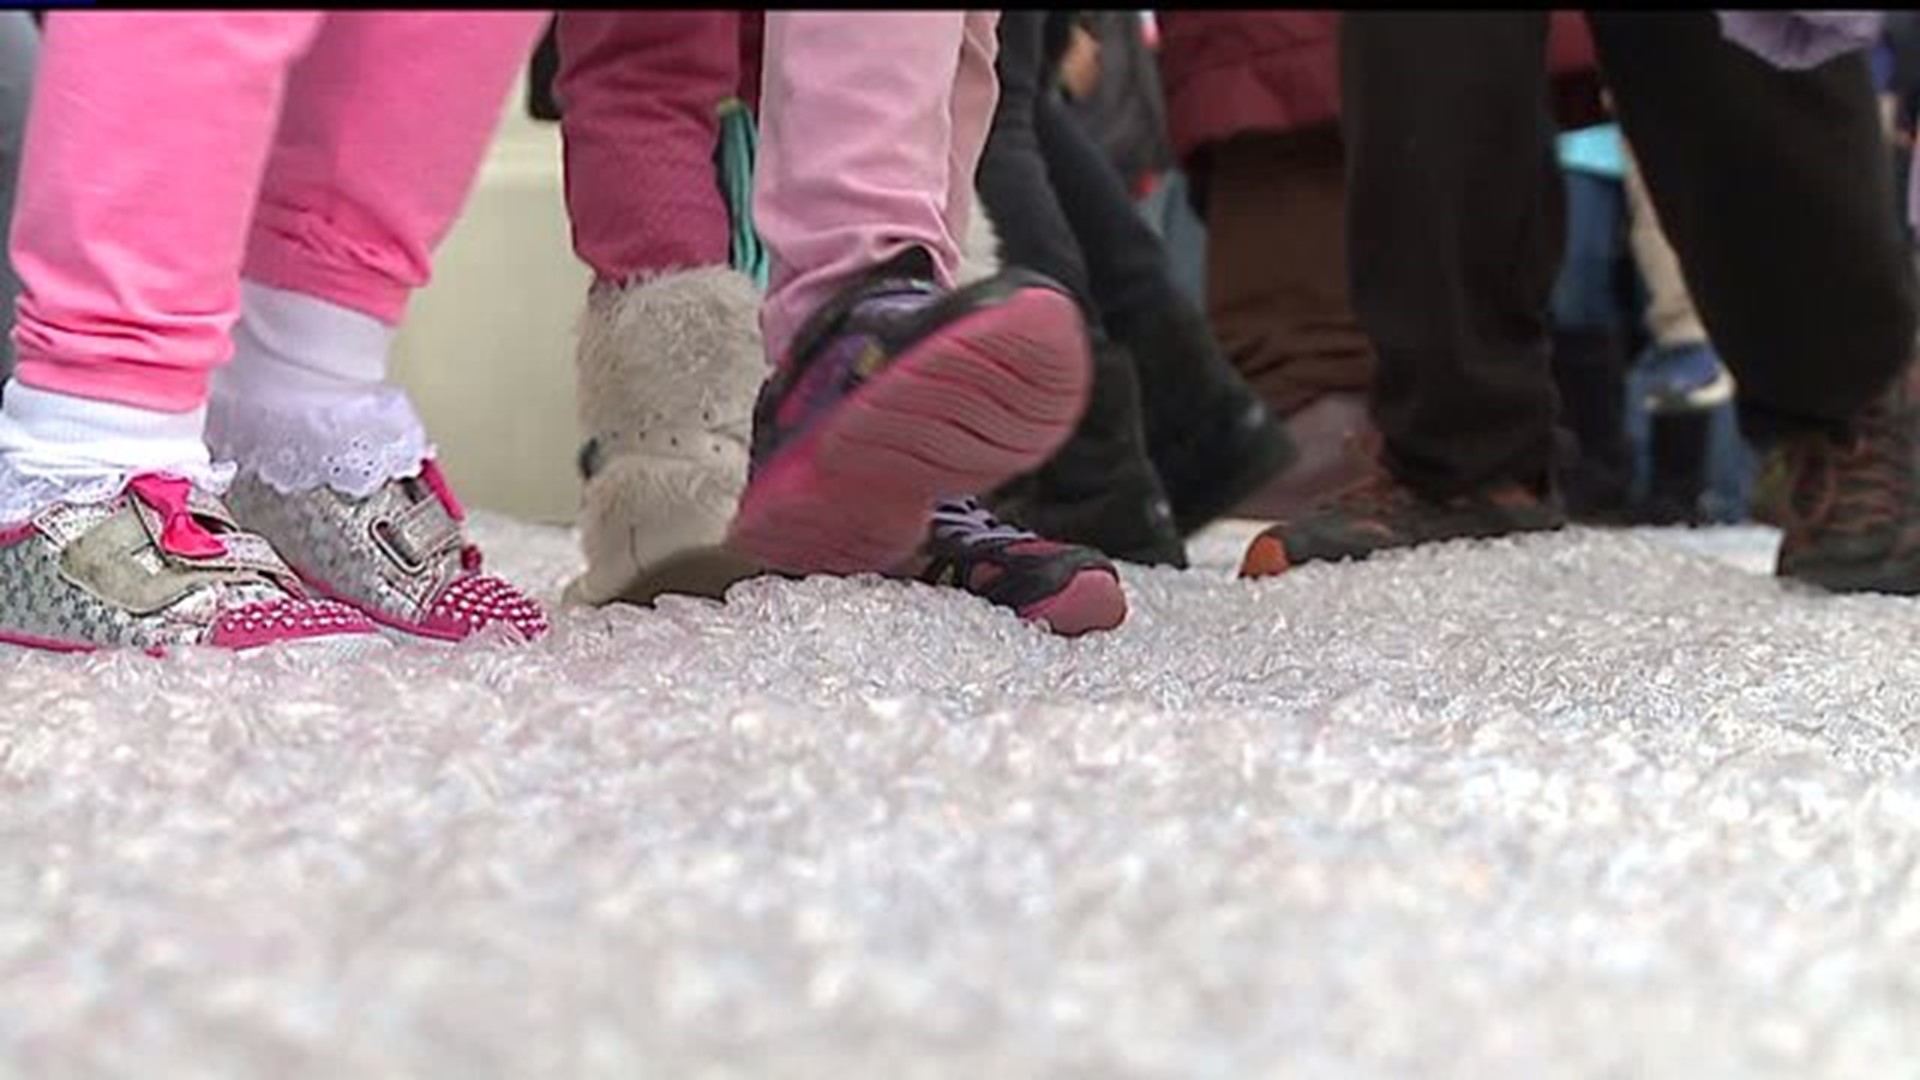 Annual "Bubble Wrap Stomp" in Hershey